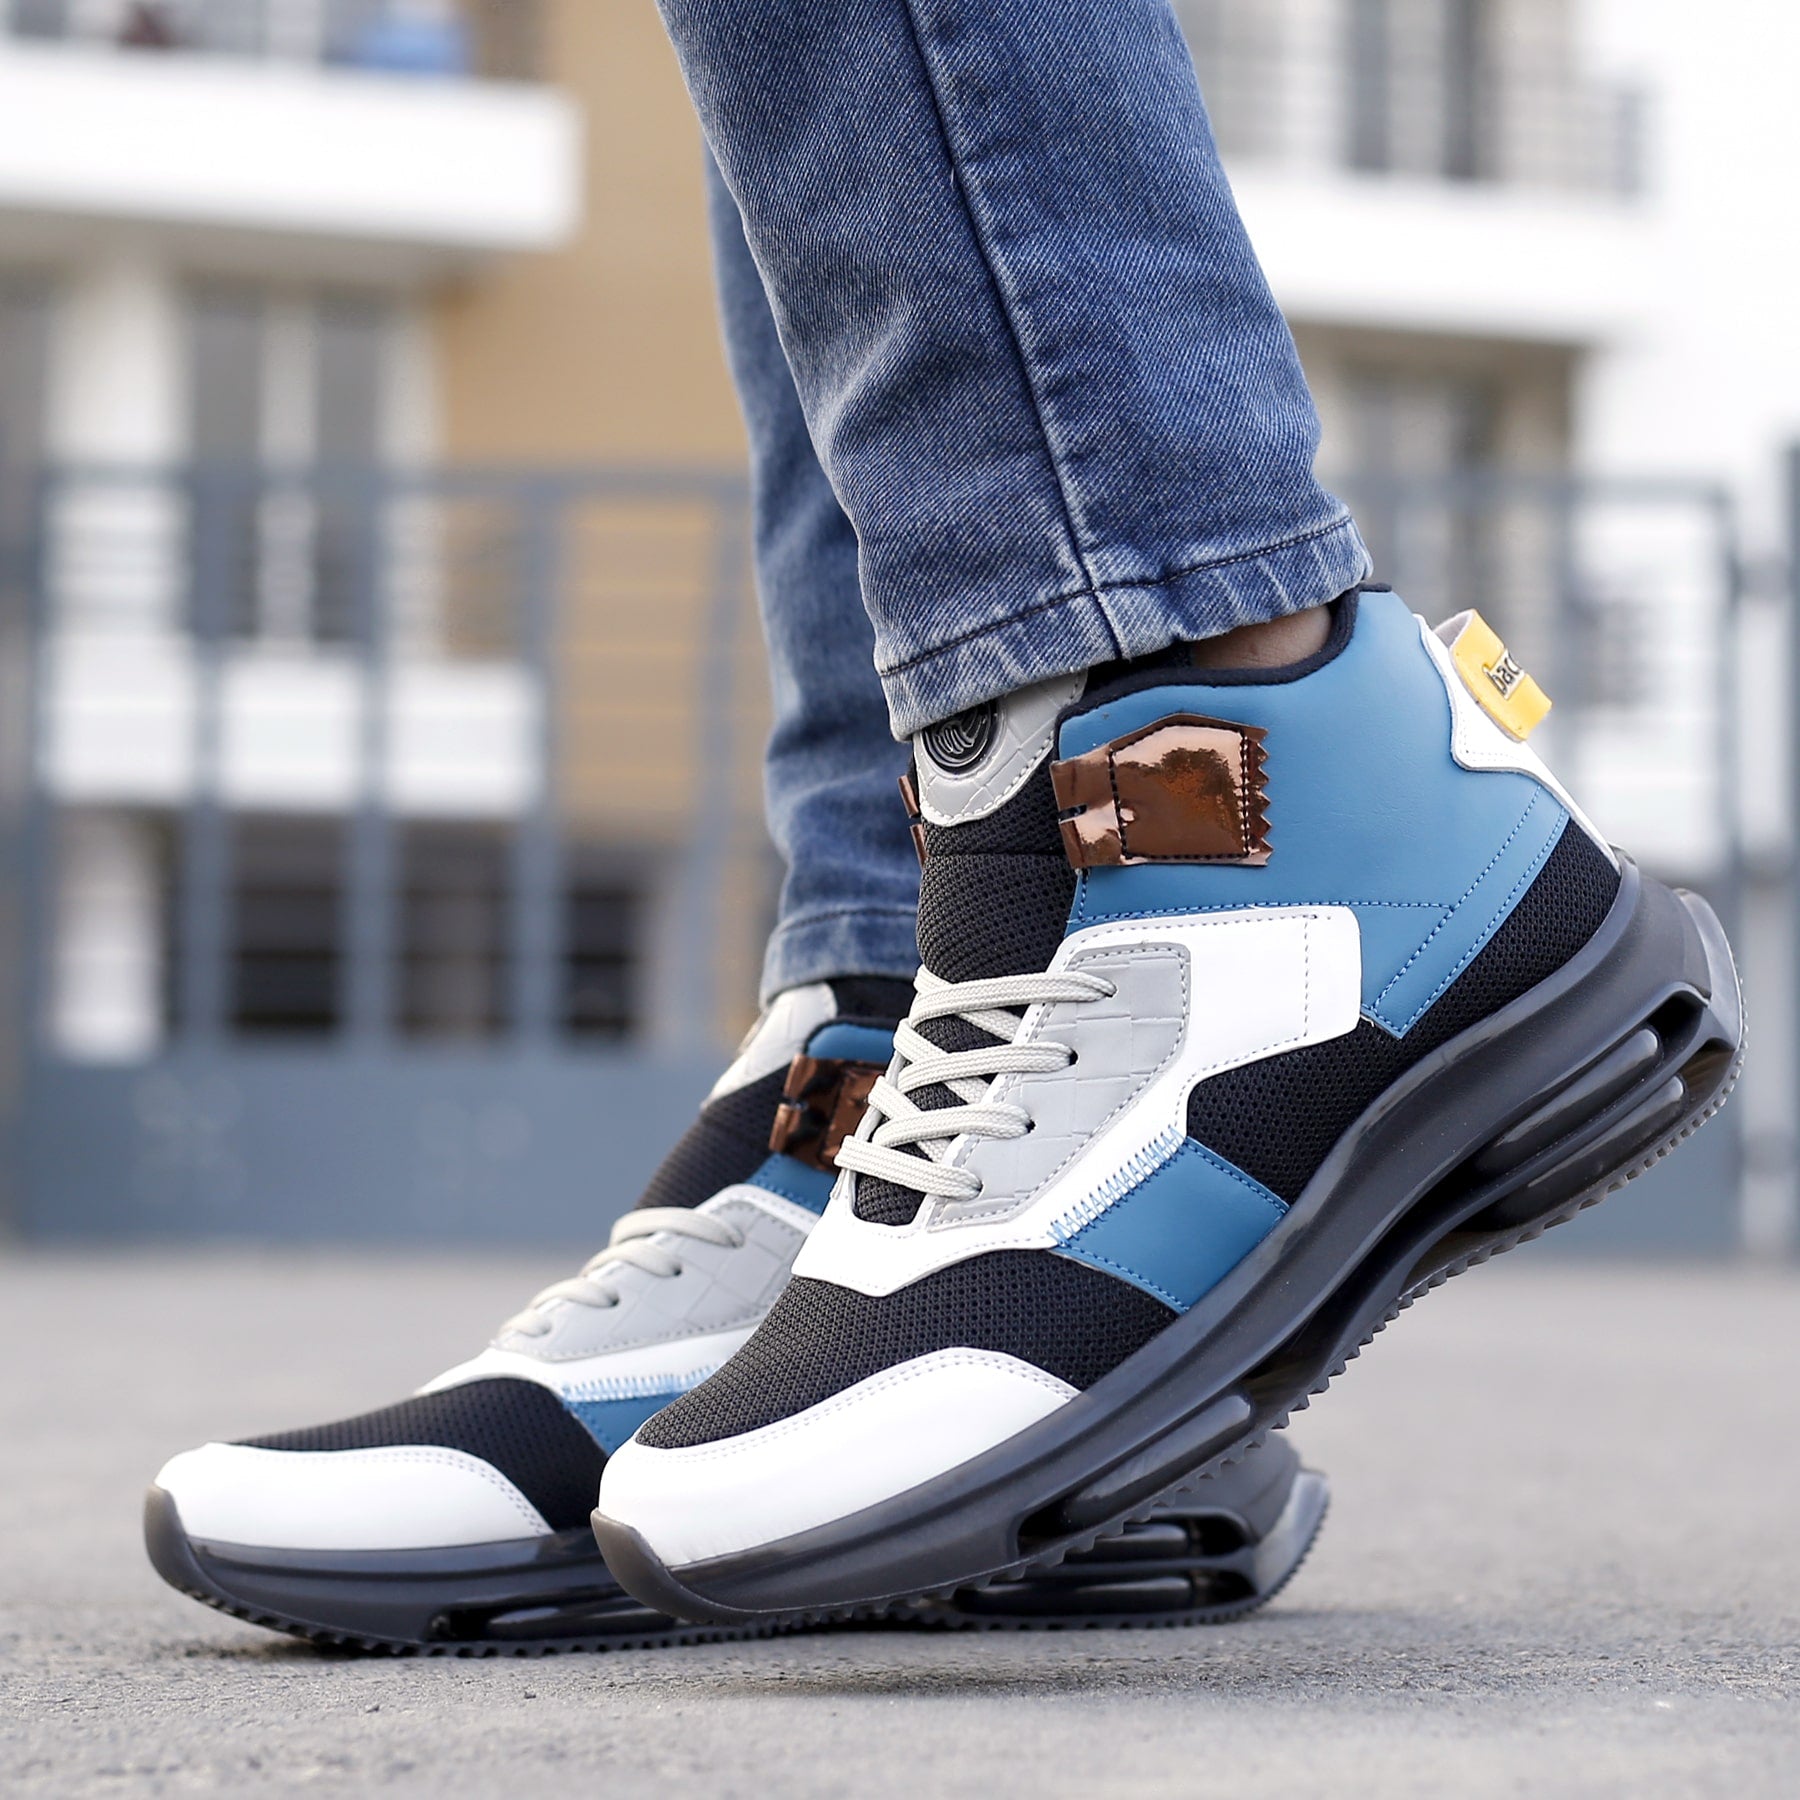 Bacca Bucci XOXO High top elevated high Street Fashion Sneakers for Men